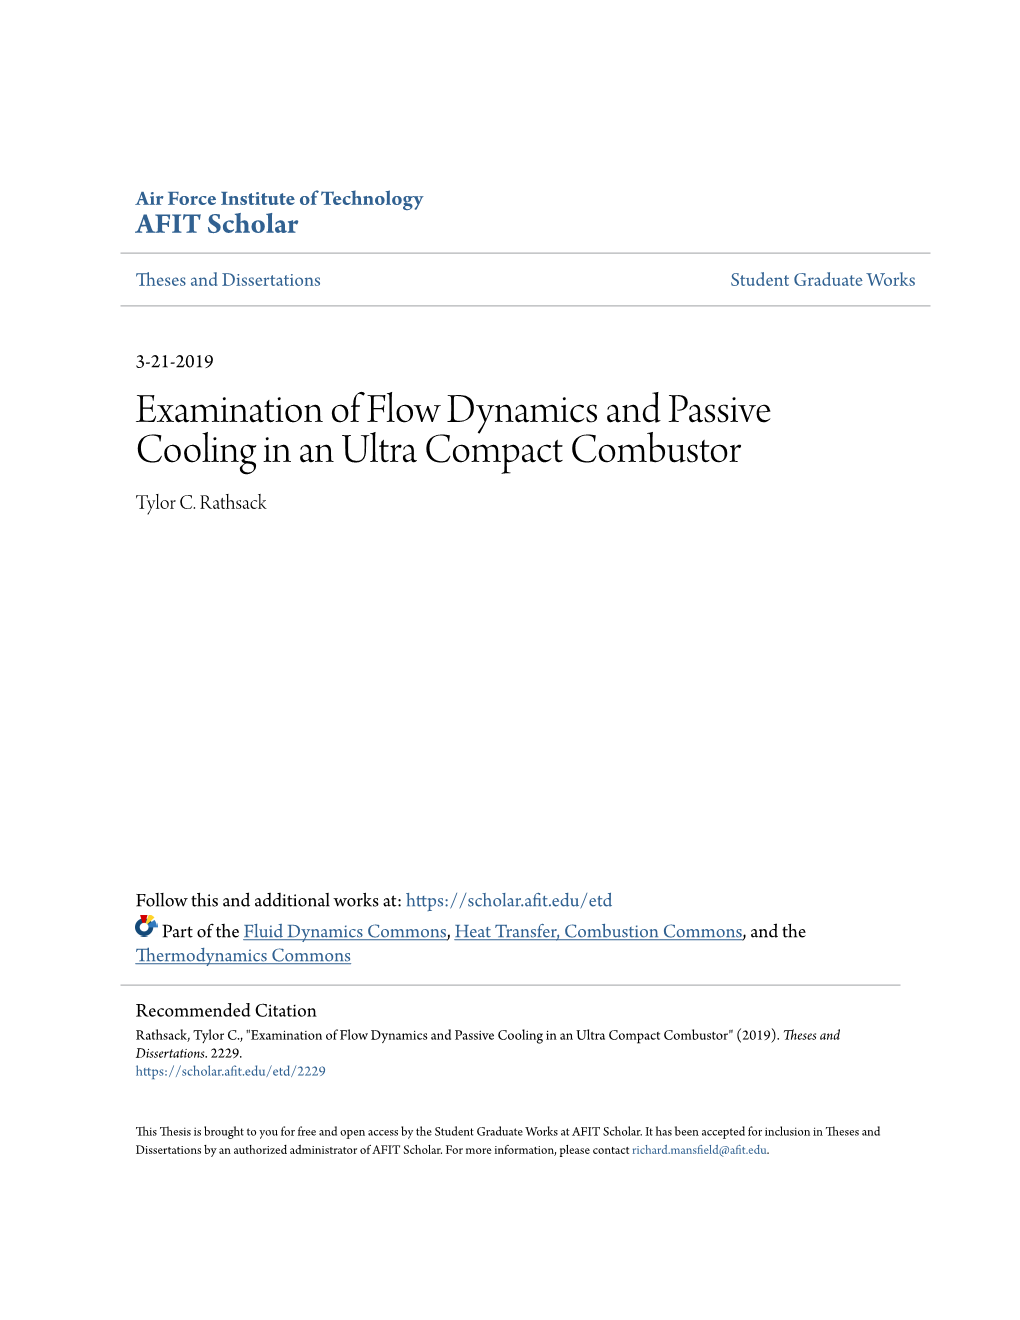 Examination of Flow Dynamics and Passive Cooling in an Ultra Compact Combustor Tylor C